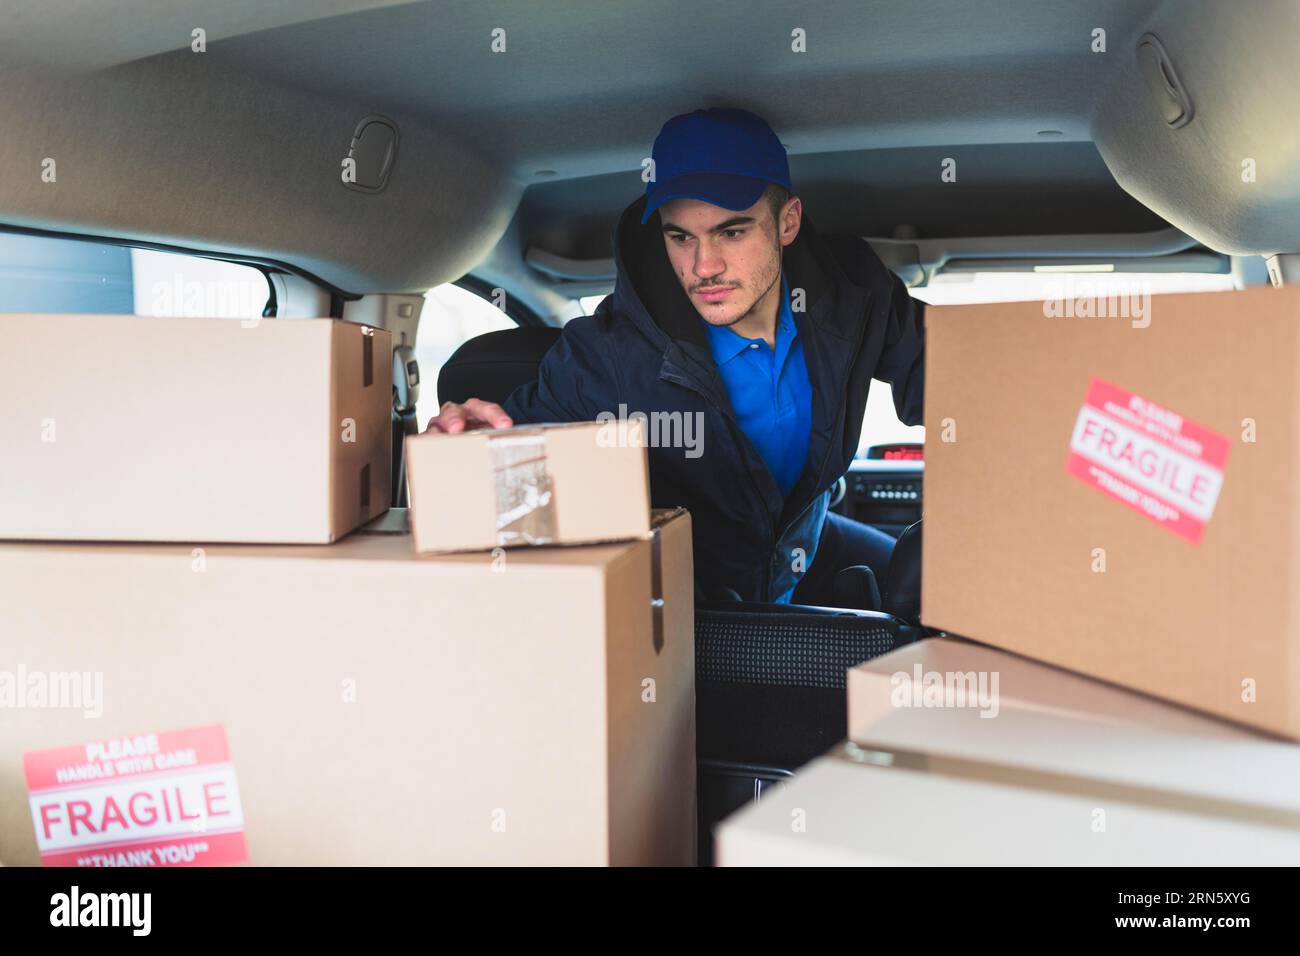 Man car checking boxes delivery Stock Photo